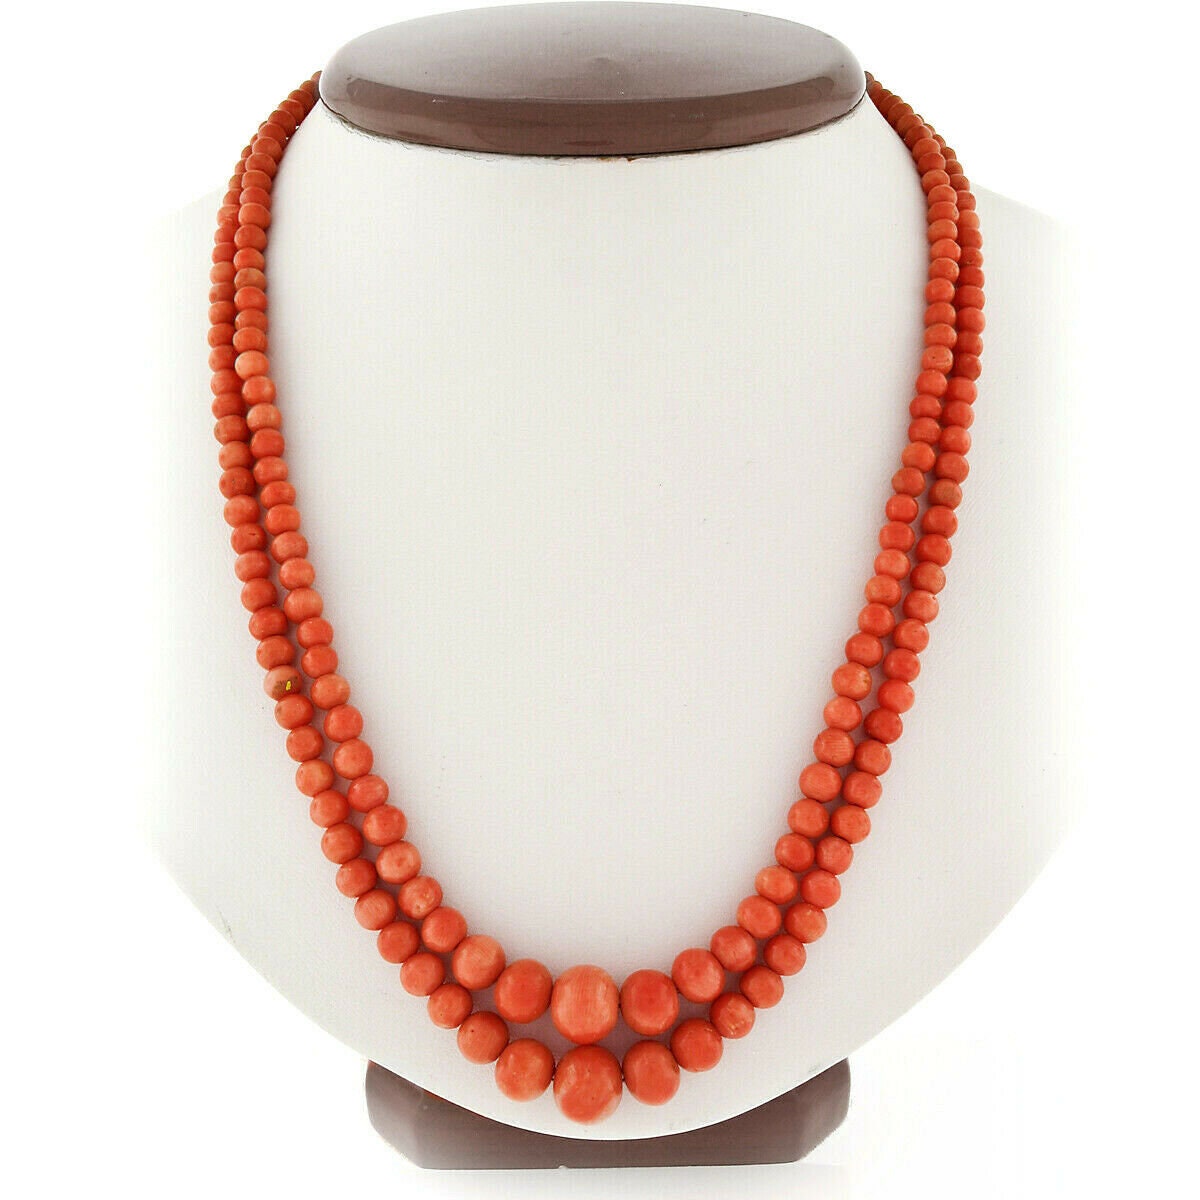 Ratnavali Jewels 3 Layer Real Orange Onyx Stone Beads Shell Base Metal  Necklace for Women